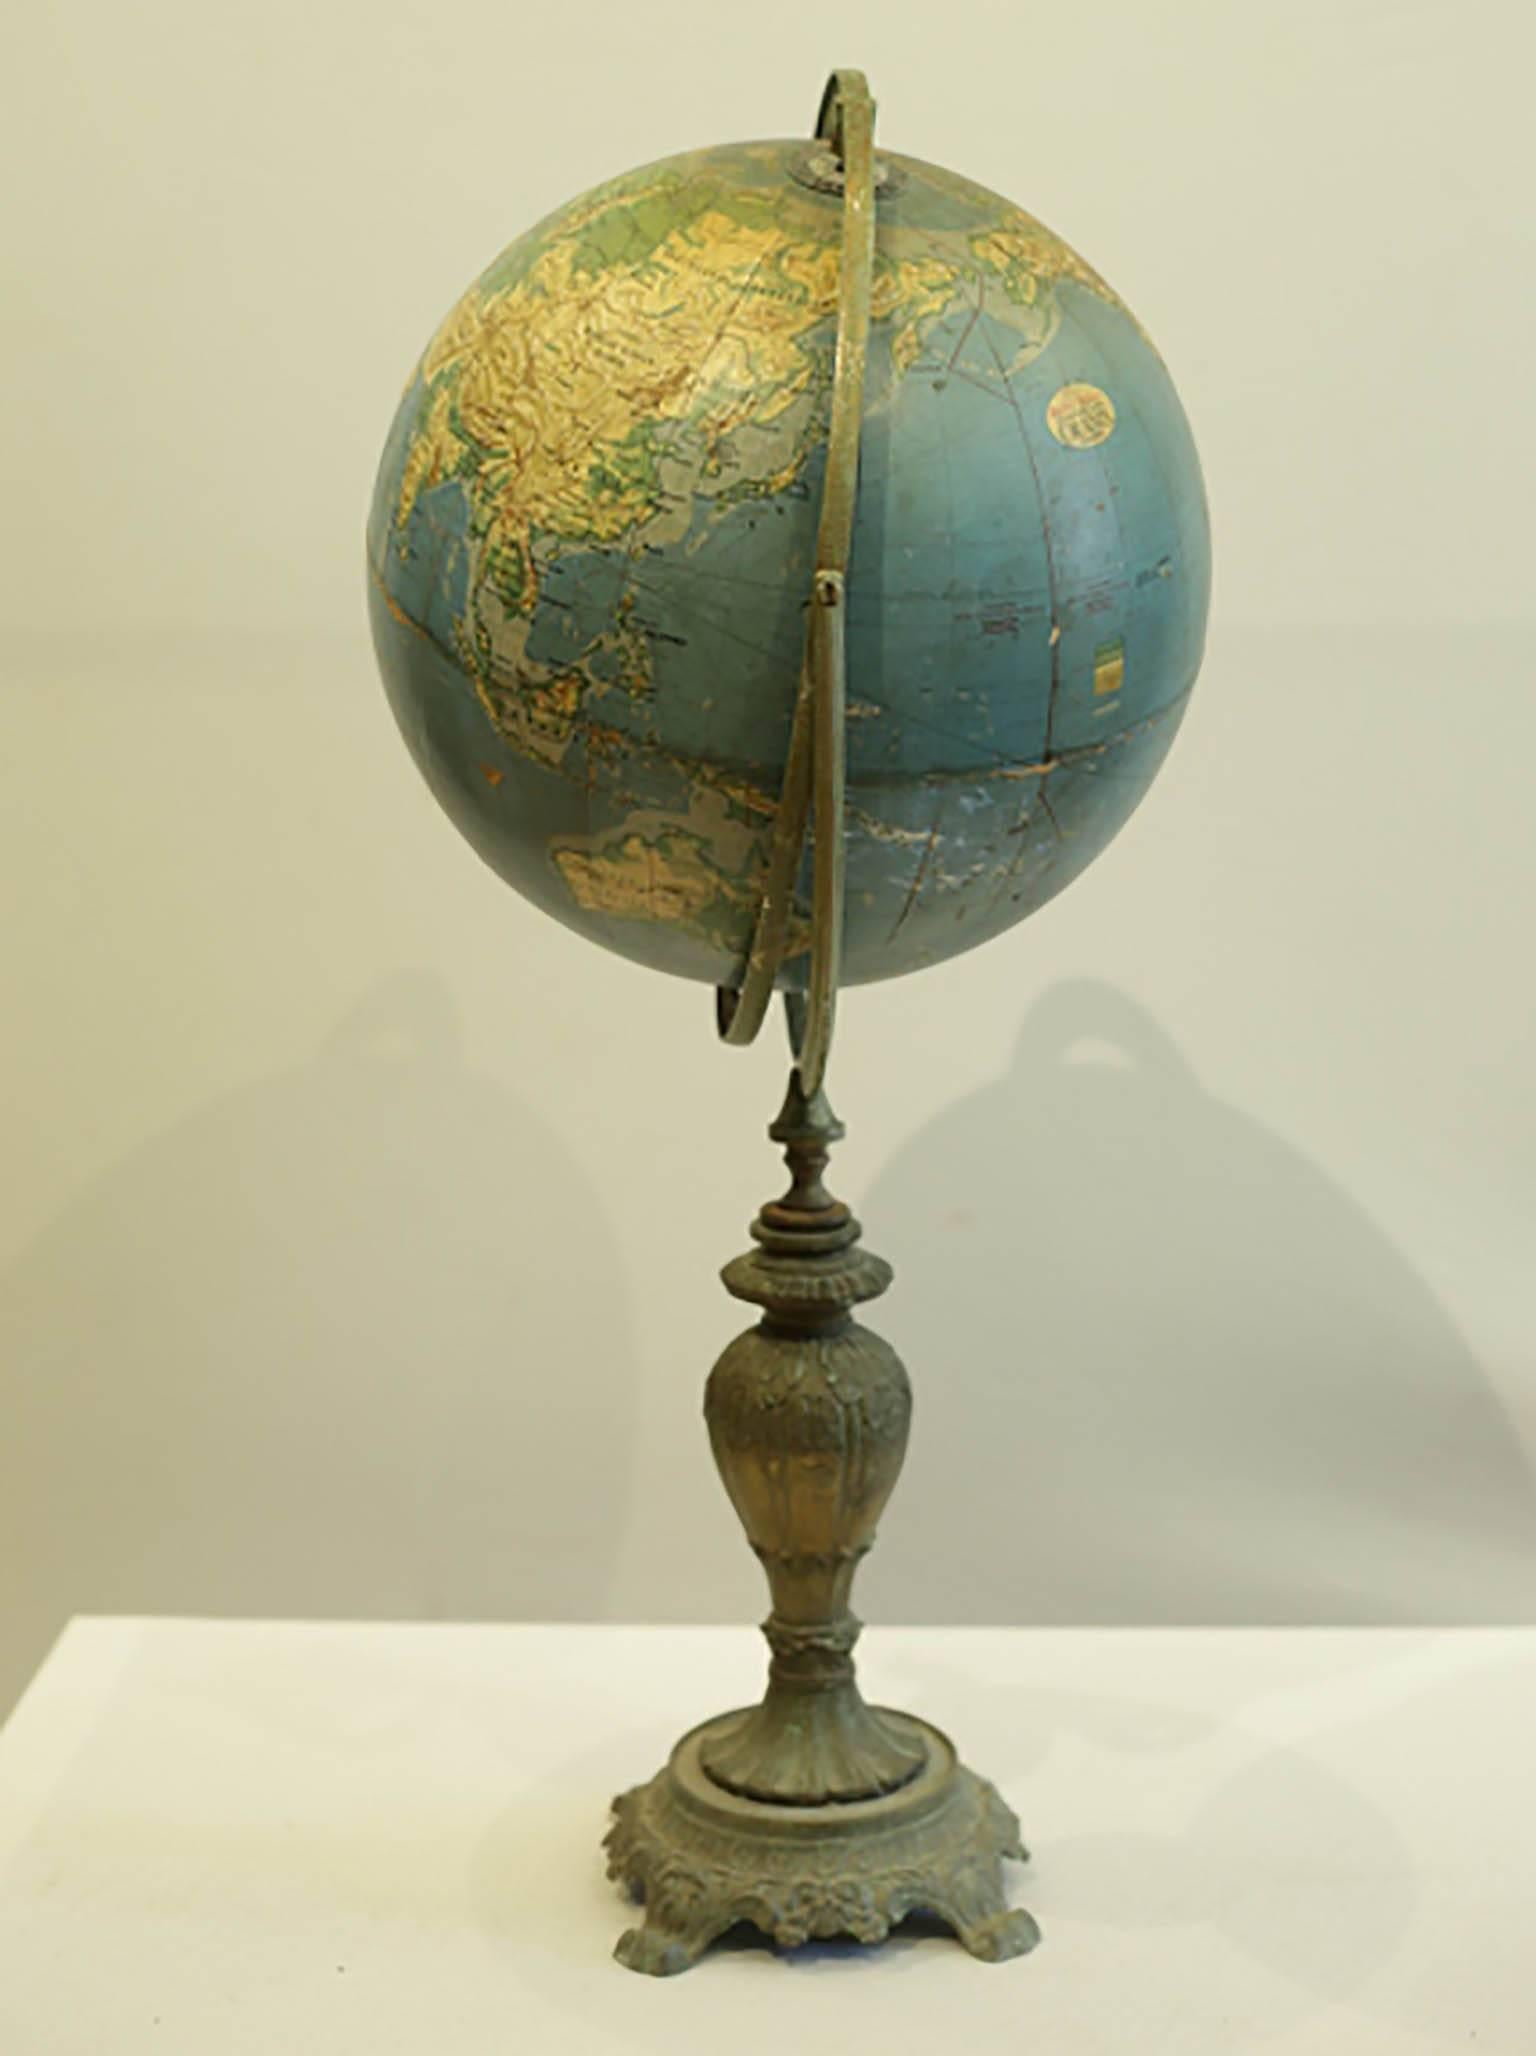 Large topographic globe by Grams with patinated metal bracket and base. 

Condition:
The globe is slightly wobbly from the middle section up.
The globe lifts off of the stand leaving a long stem. There appears to be a piece missing in that area